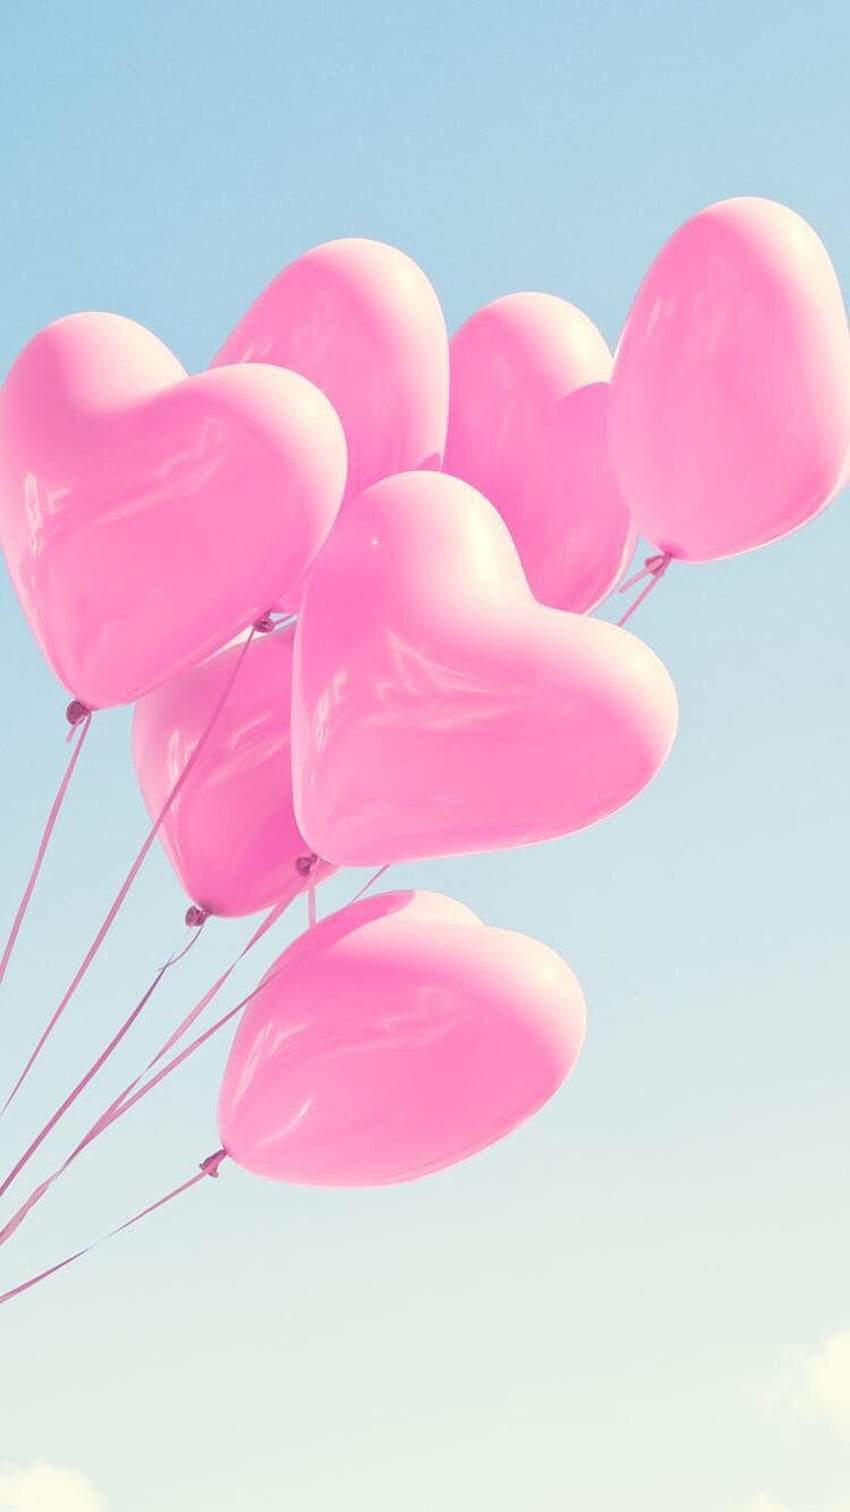 Mobile wallpaper Sky Colors Balloon Colorful Photography 907414  download the picture for free